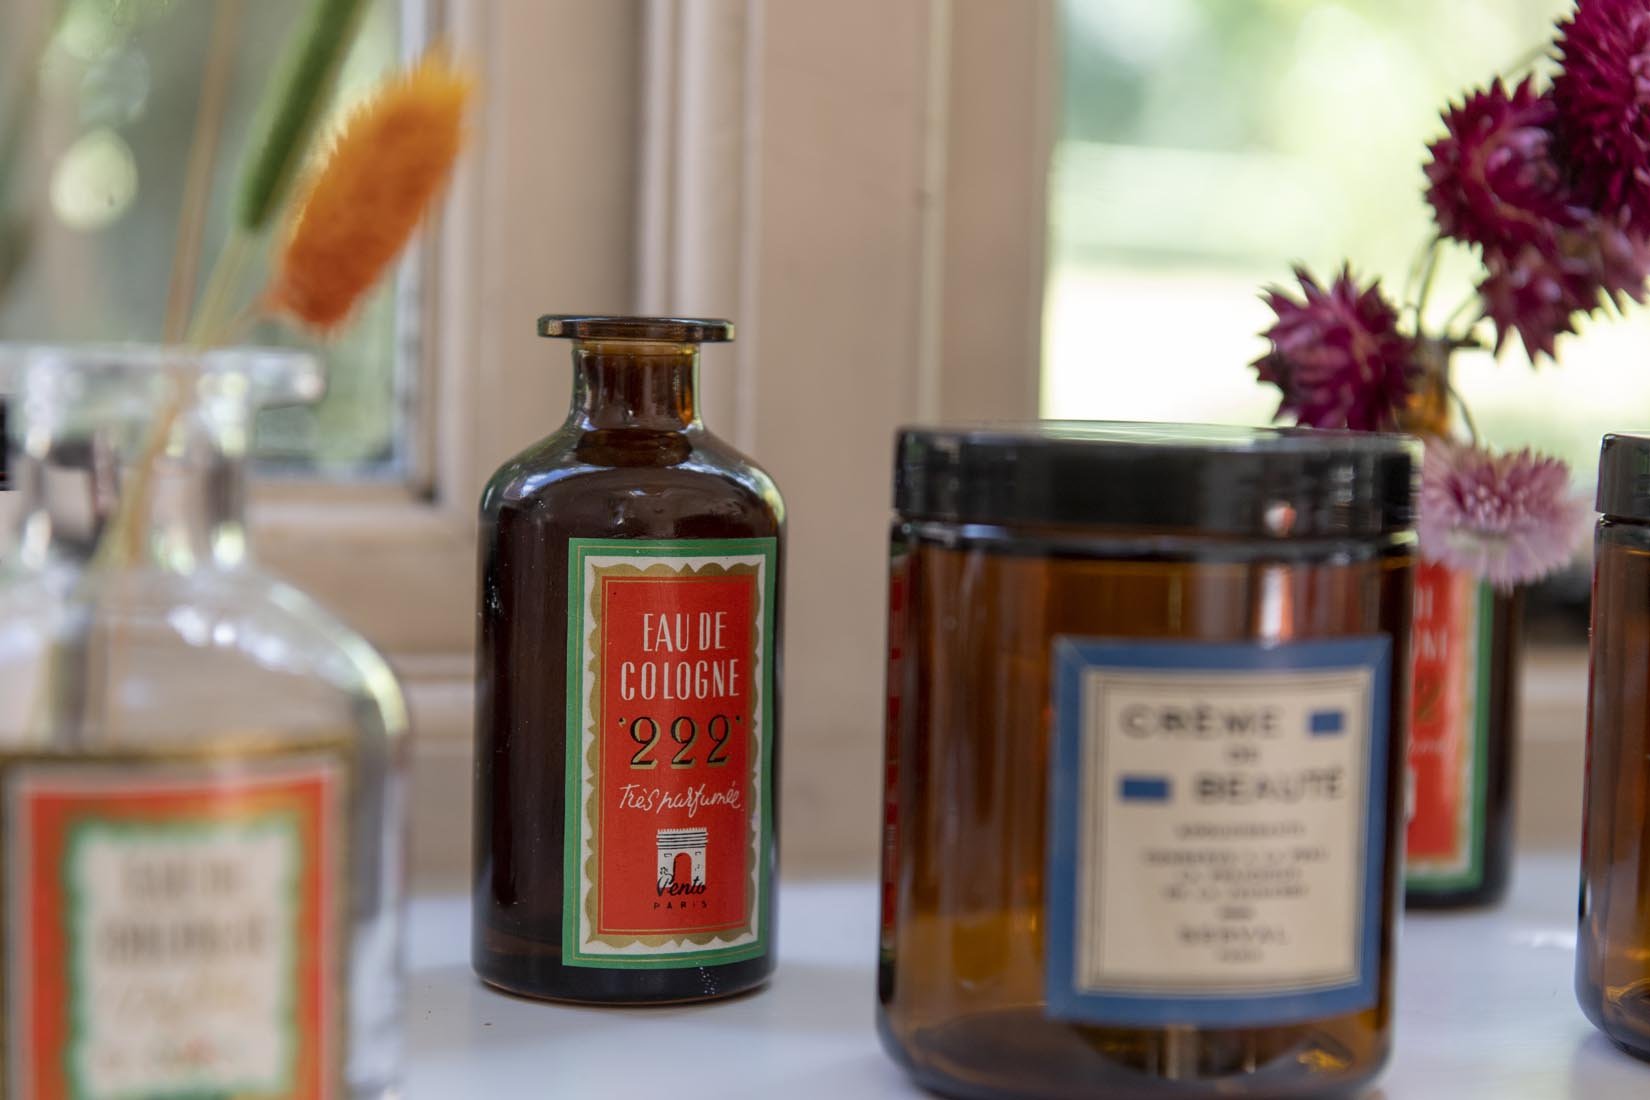 Antique cologne labels on apothecary bottles for styling - Natalia Willmott